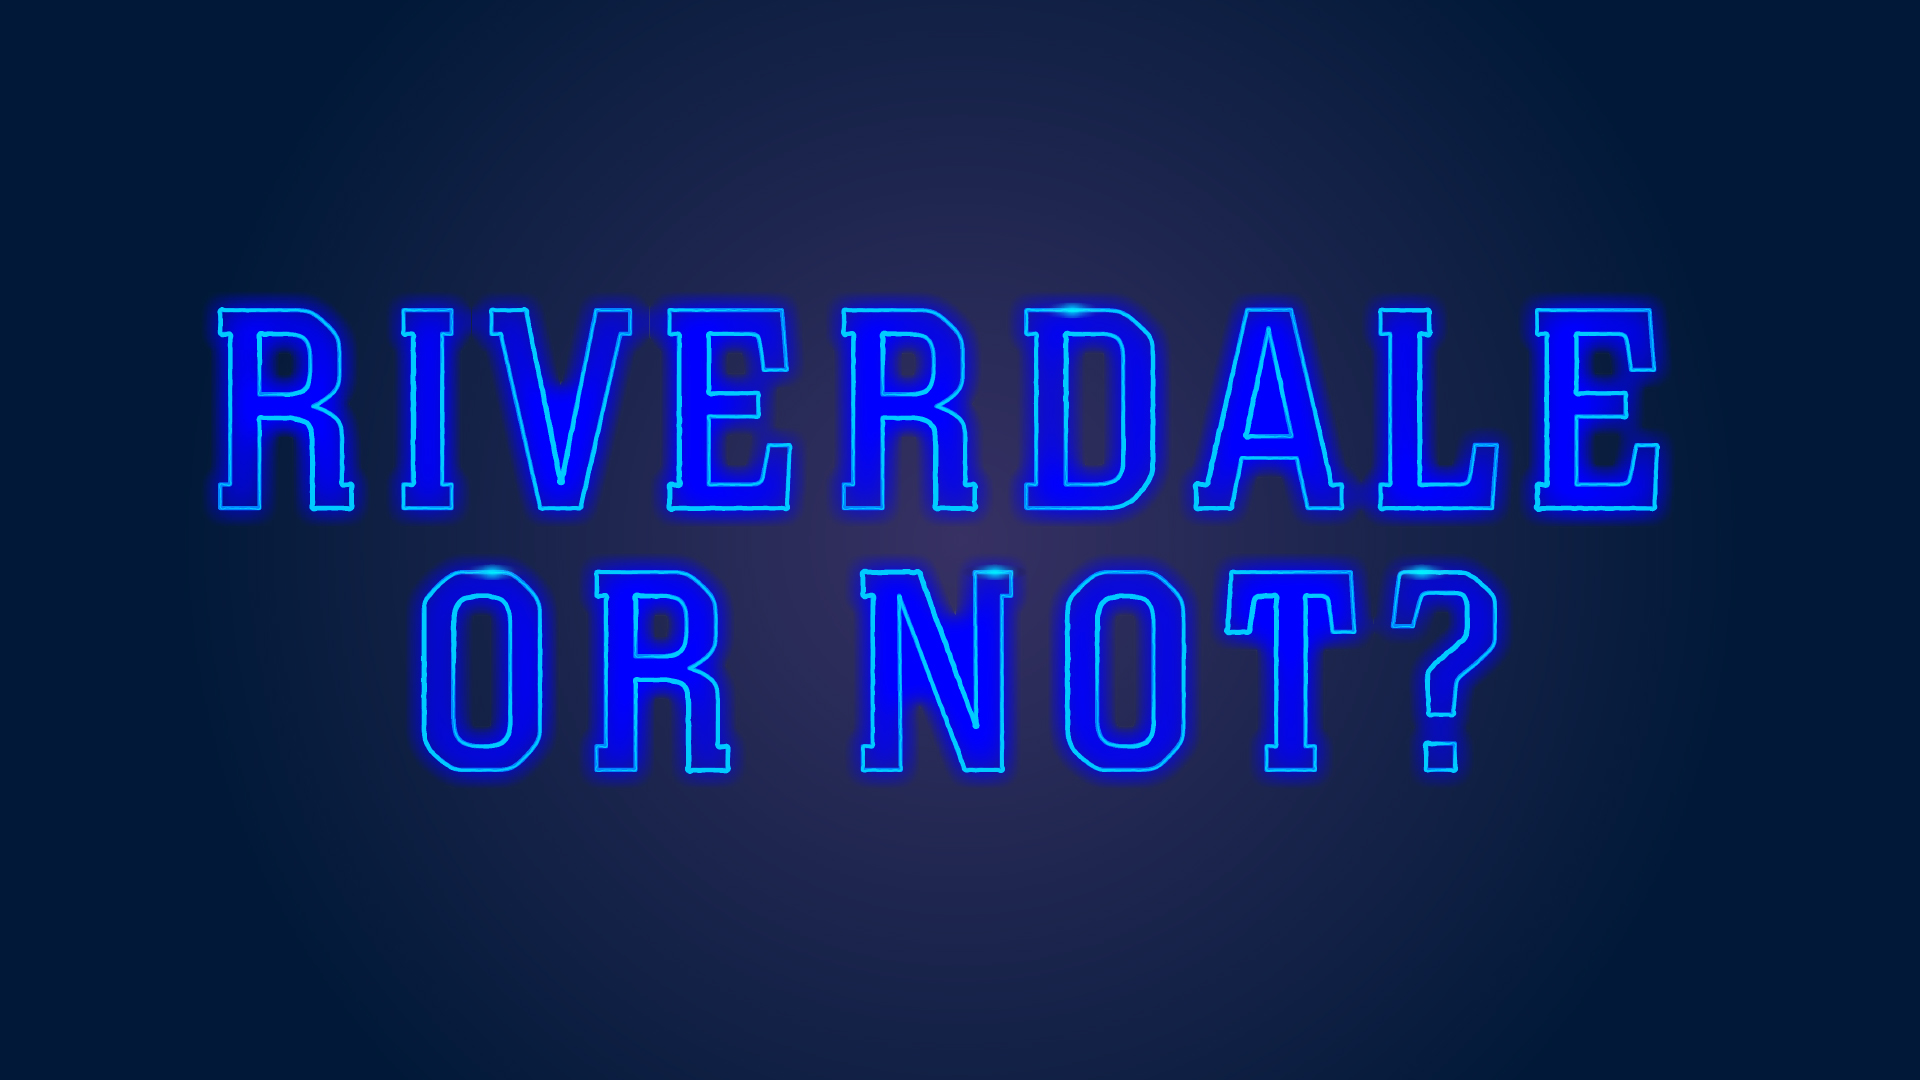 Illustration of the text, “RIVERDALE OR NOT” done in the style of the show title, Riverdale